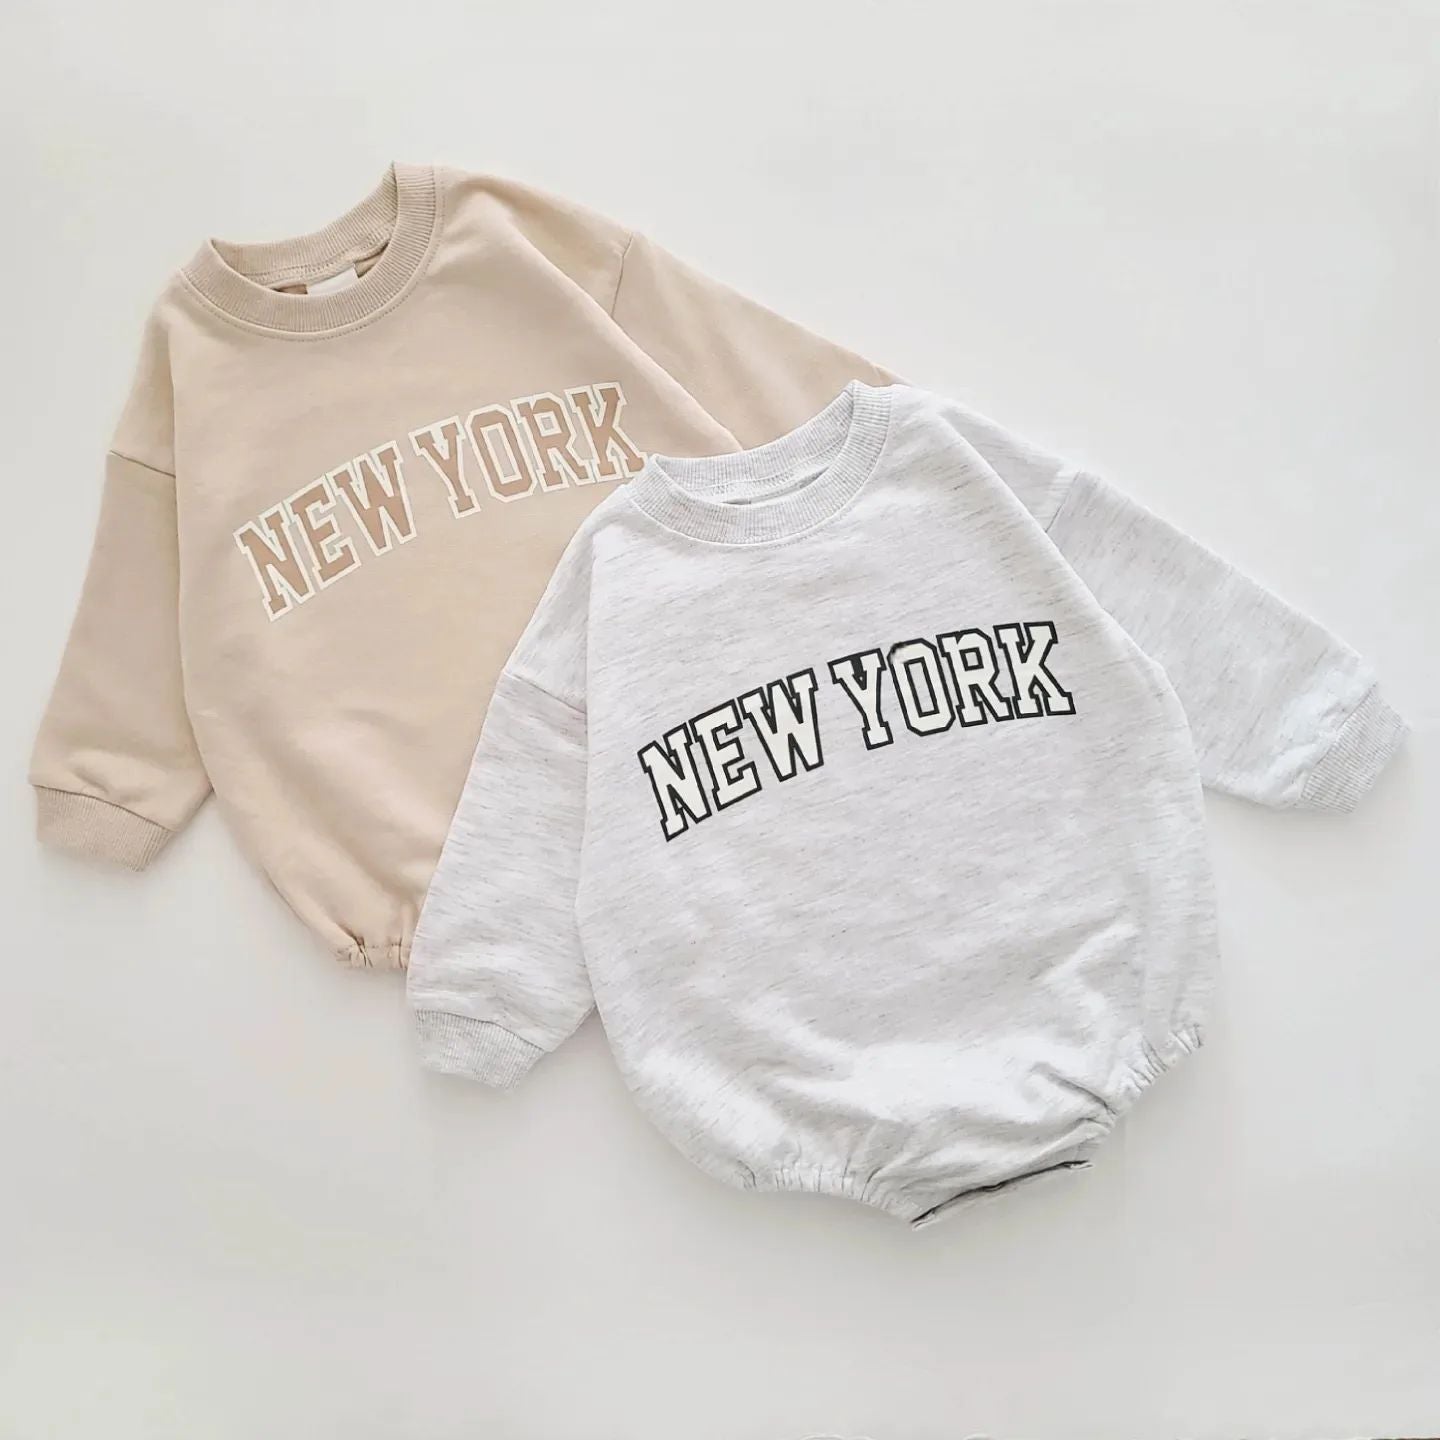 New York Sweatshirt Romper | Urban Style and Comfort for Your Little One itsykitschycoo